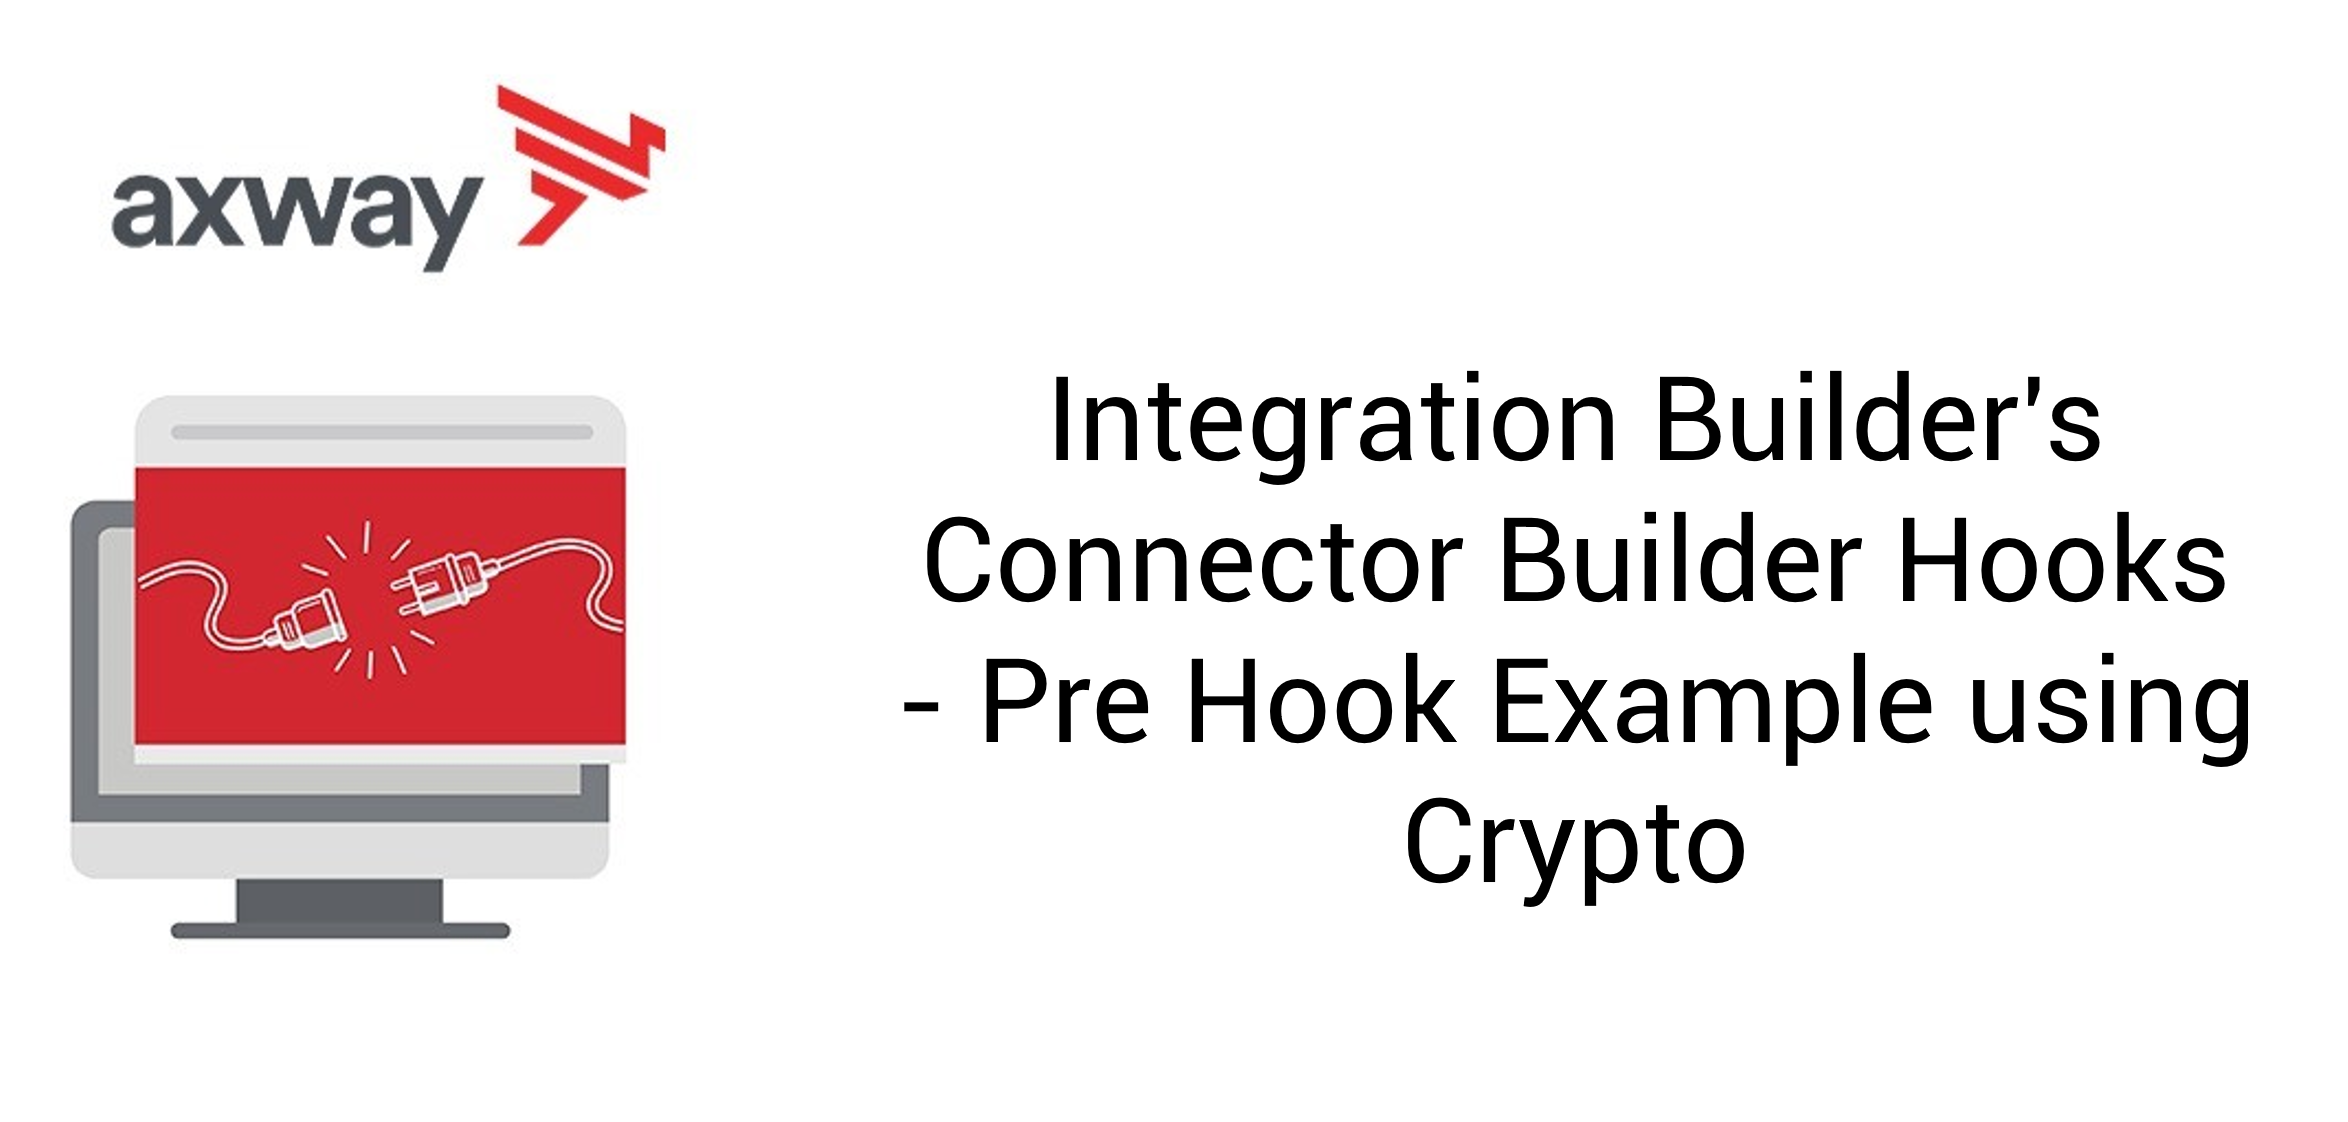 Integration Builder’s Connector Builder Hooks – Pre Hook Example using Crypto